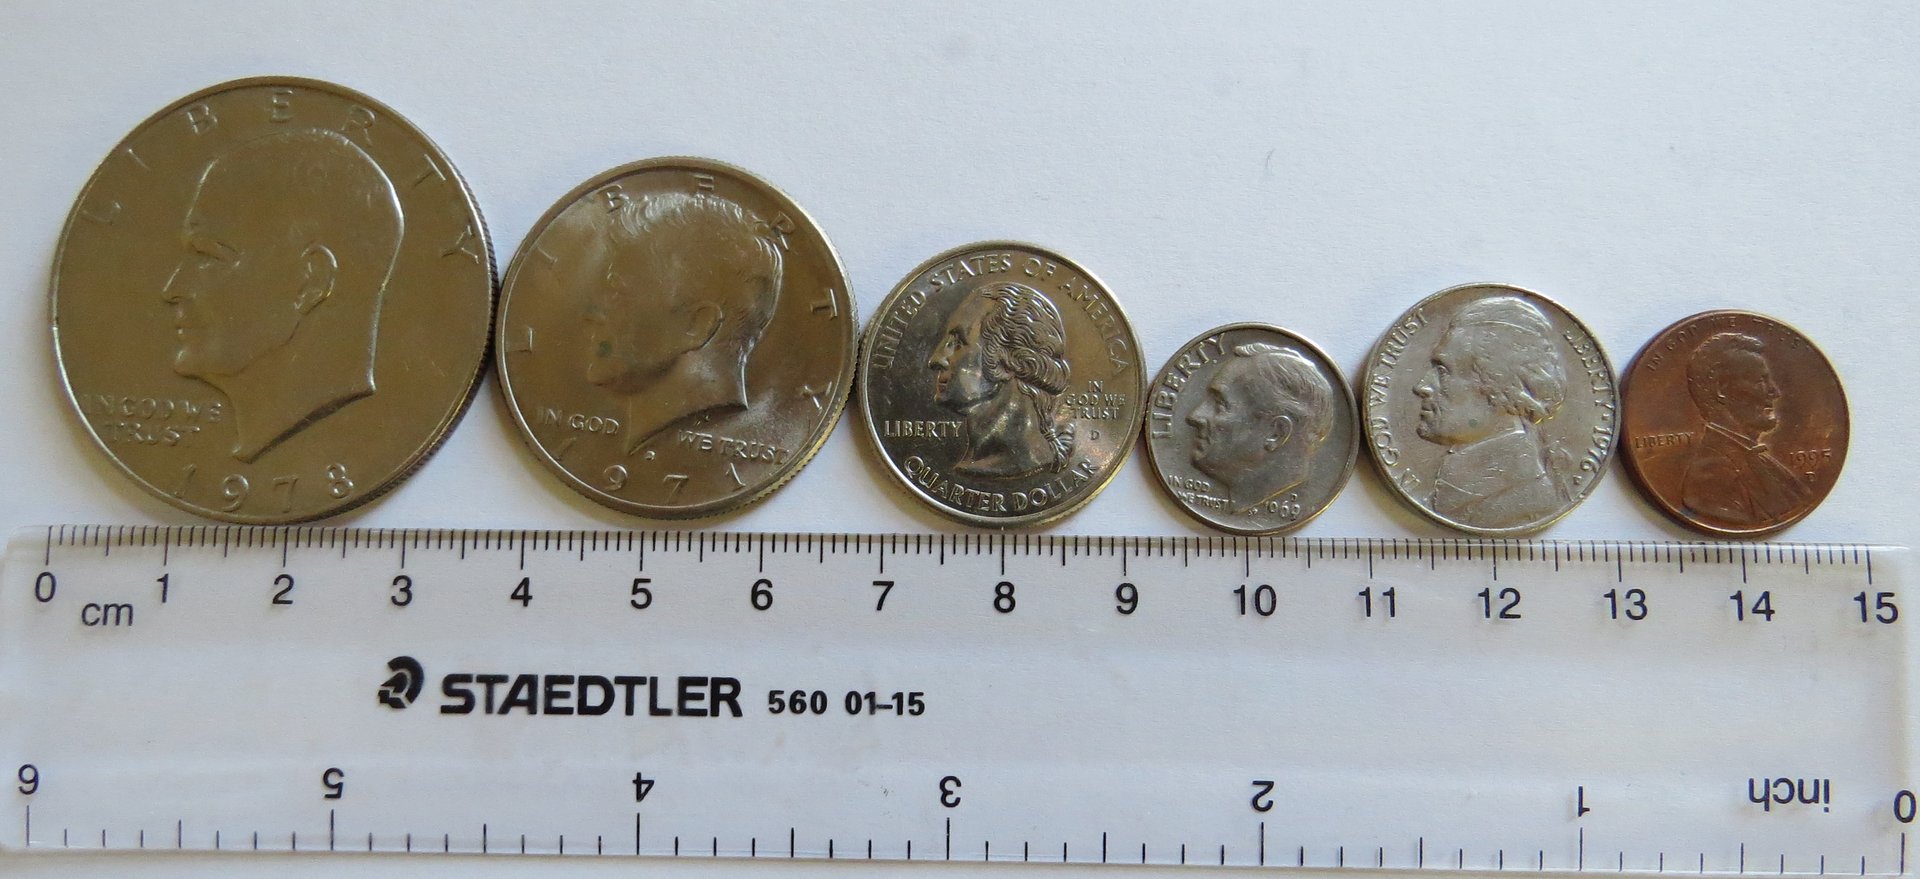 Size comparison with one US cent coin (left), the tip of a pen (center)